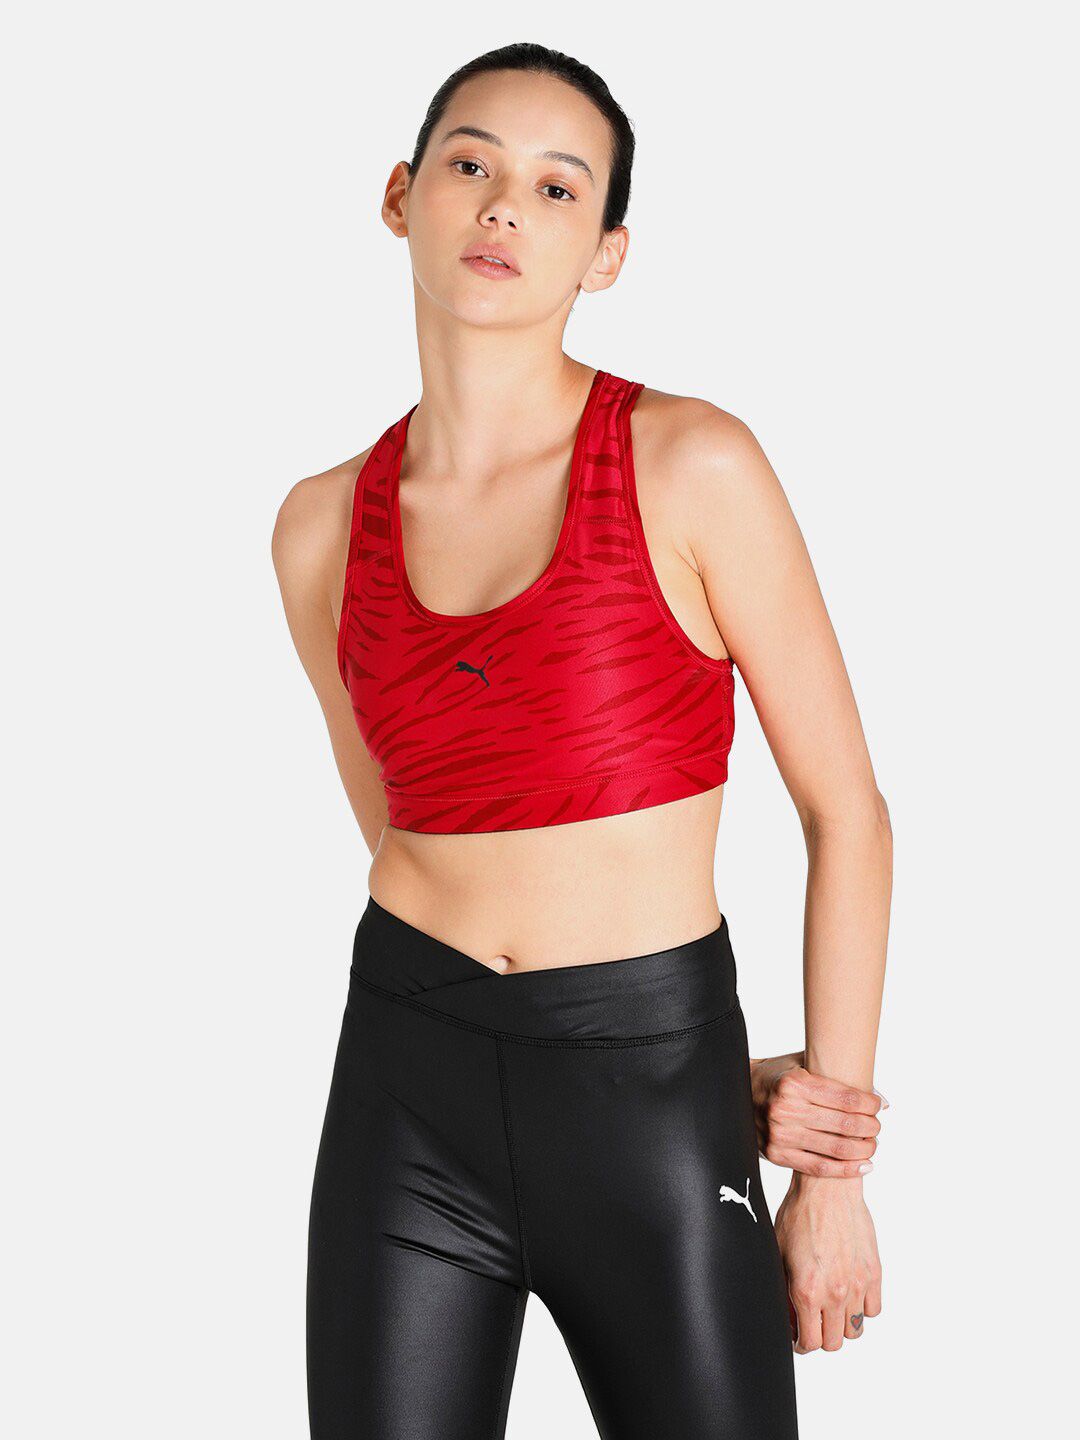 Puma Red Mid Impact 4Keeps Graphic Women's Training Bra Price in India